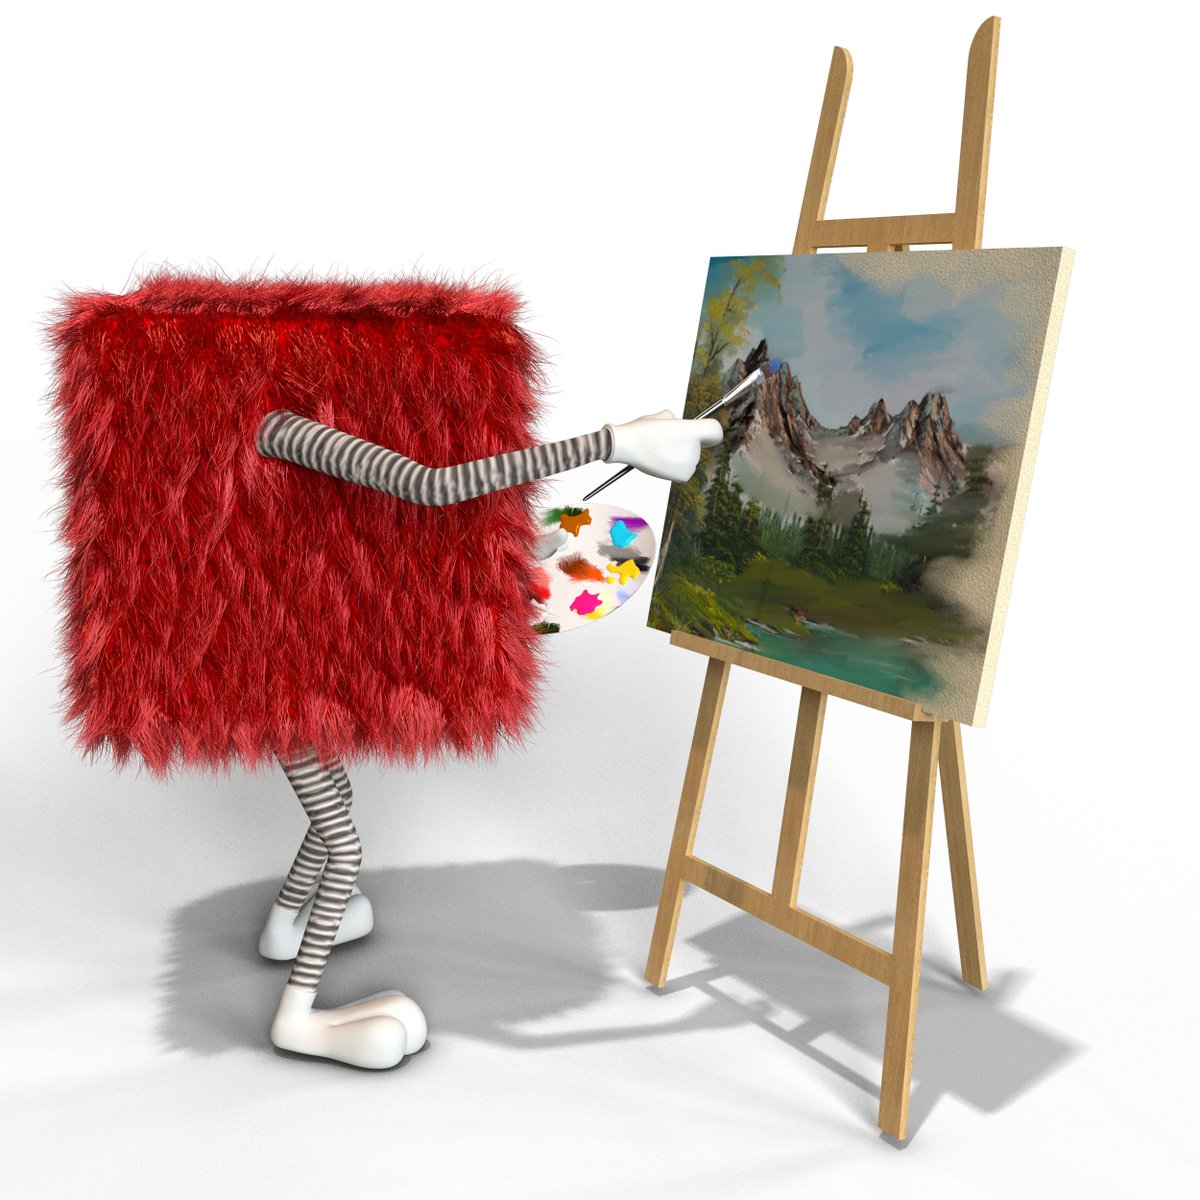 It's National Art Day! We love all things creative here at Pixel. If you're anything like RED, you'll be surprised at what you can achieve when you put your mind to it... go on, get your (virtual) paint brush out!

#NationalArtDay #Creativecontent #Digitalsignagecontent